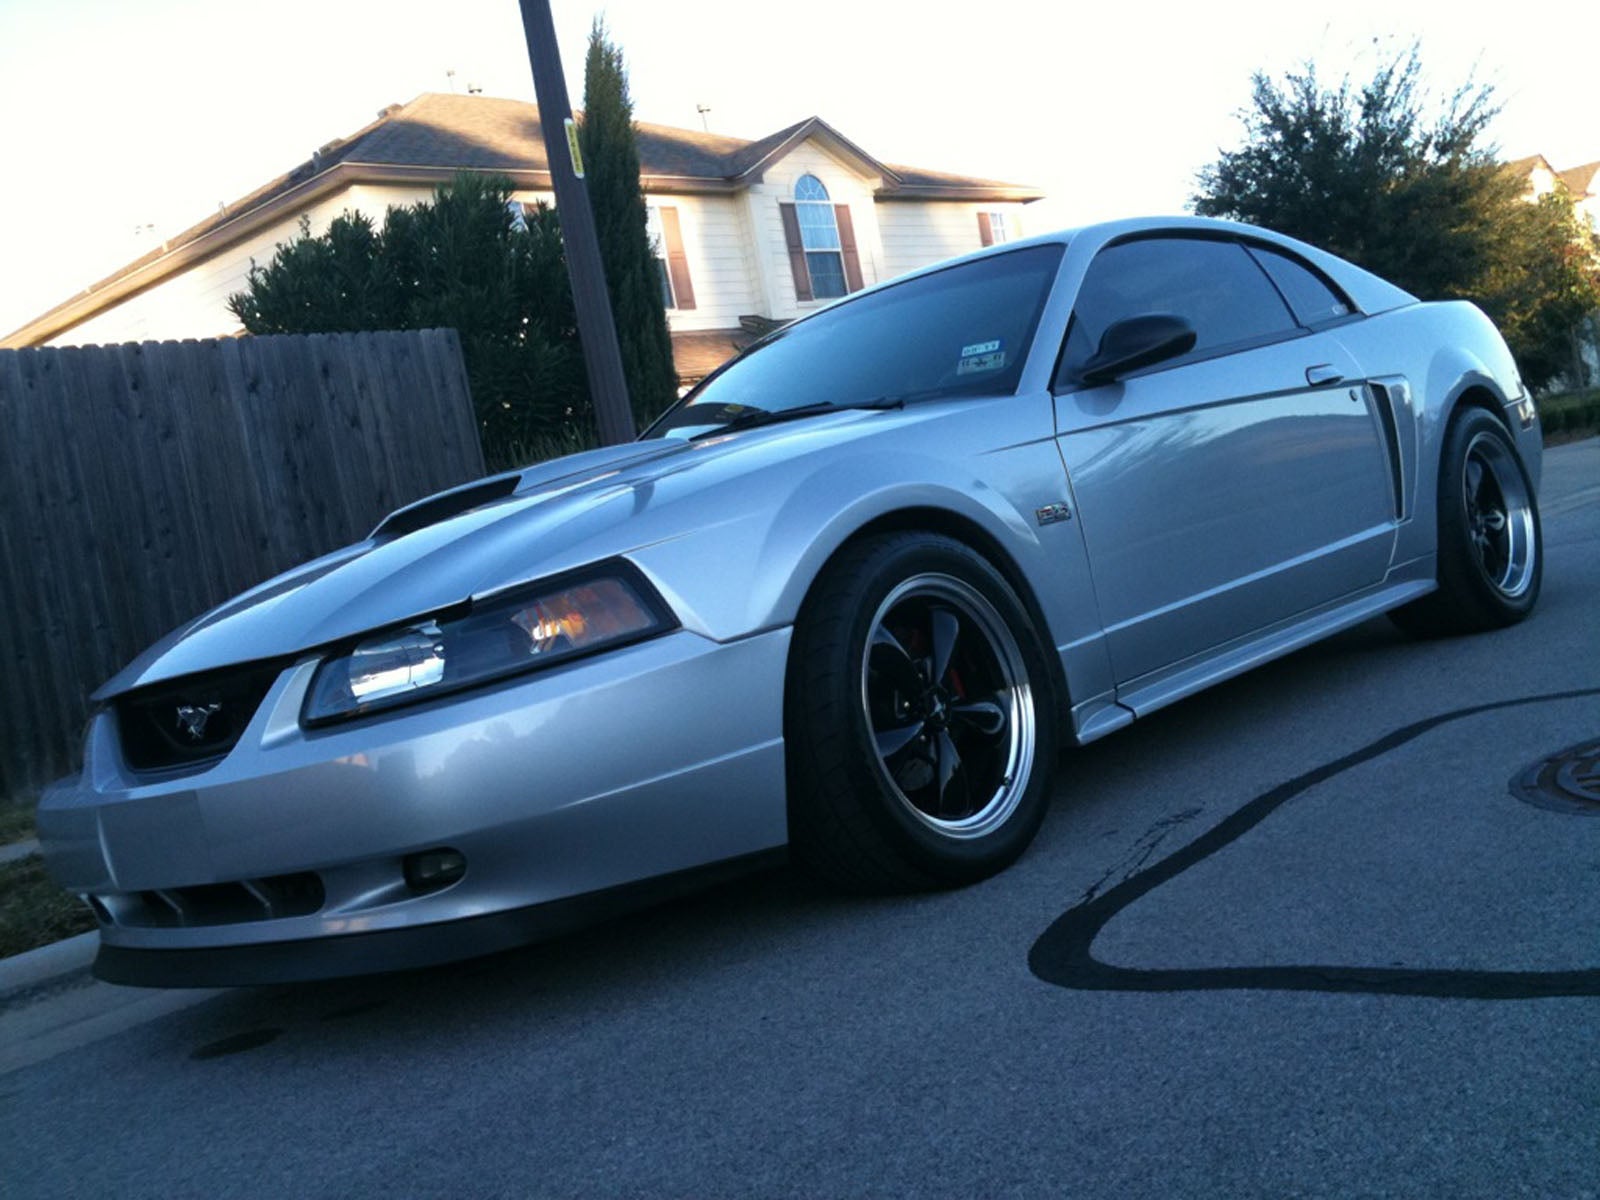 2003 Ford mustang for sale in texas #7